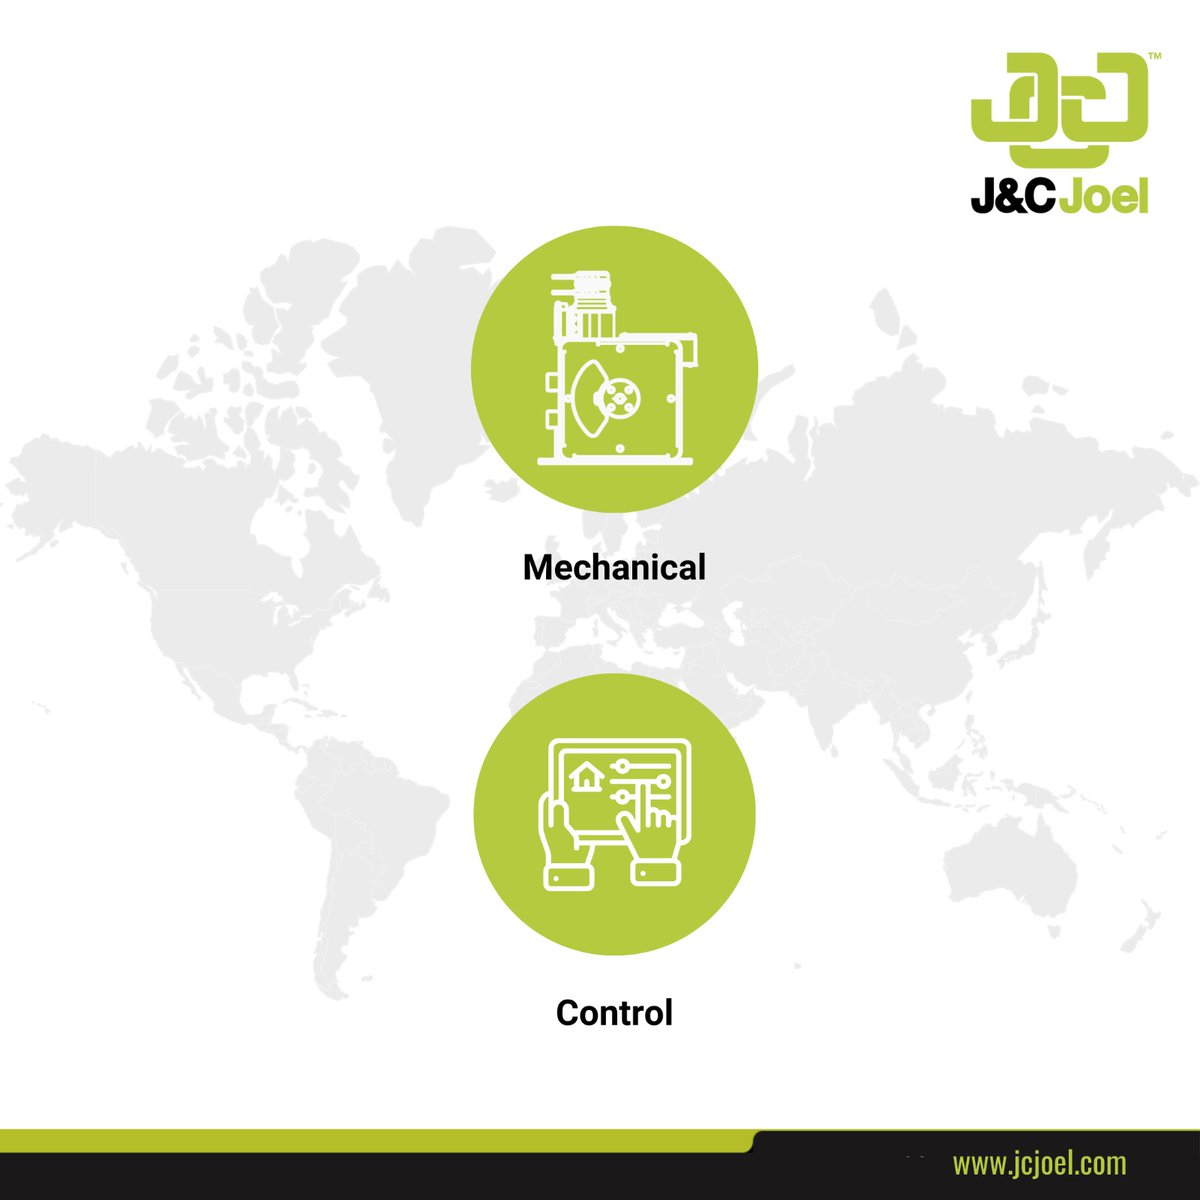 Seamless execution, complete command. We offer expert mechanical systems that orchestrate every movement with a J&C Joel control solution. Your space, your rules. #jcjoel #mechanical #control #firecurtain #pilewindwinchsystem #draperymovement #curtains #drapes #flyingsystem